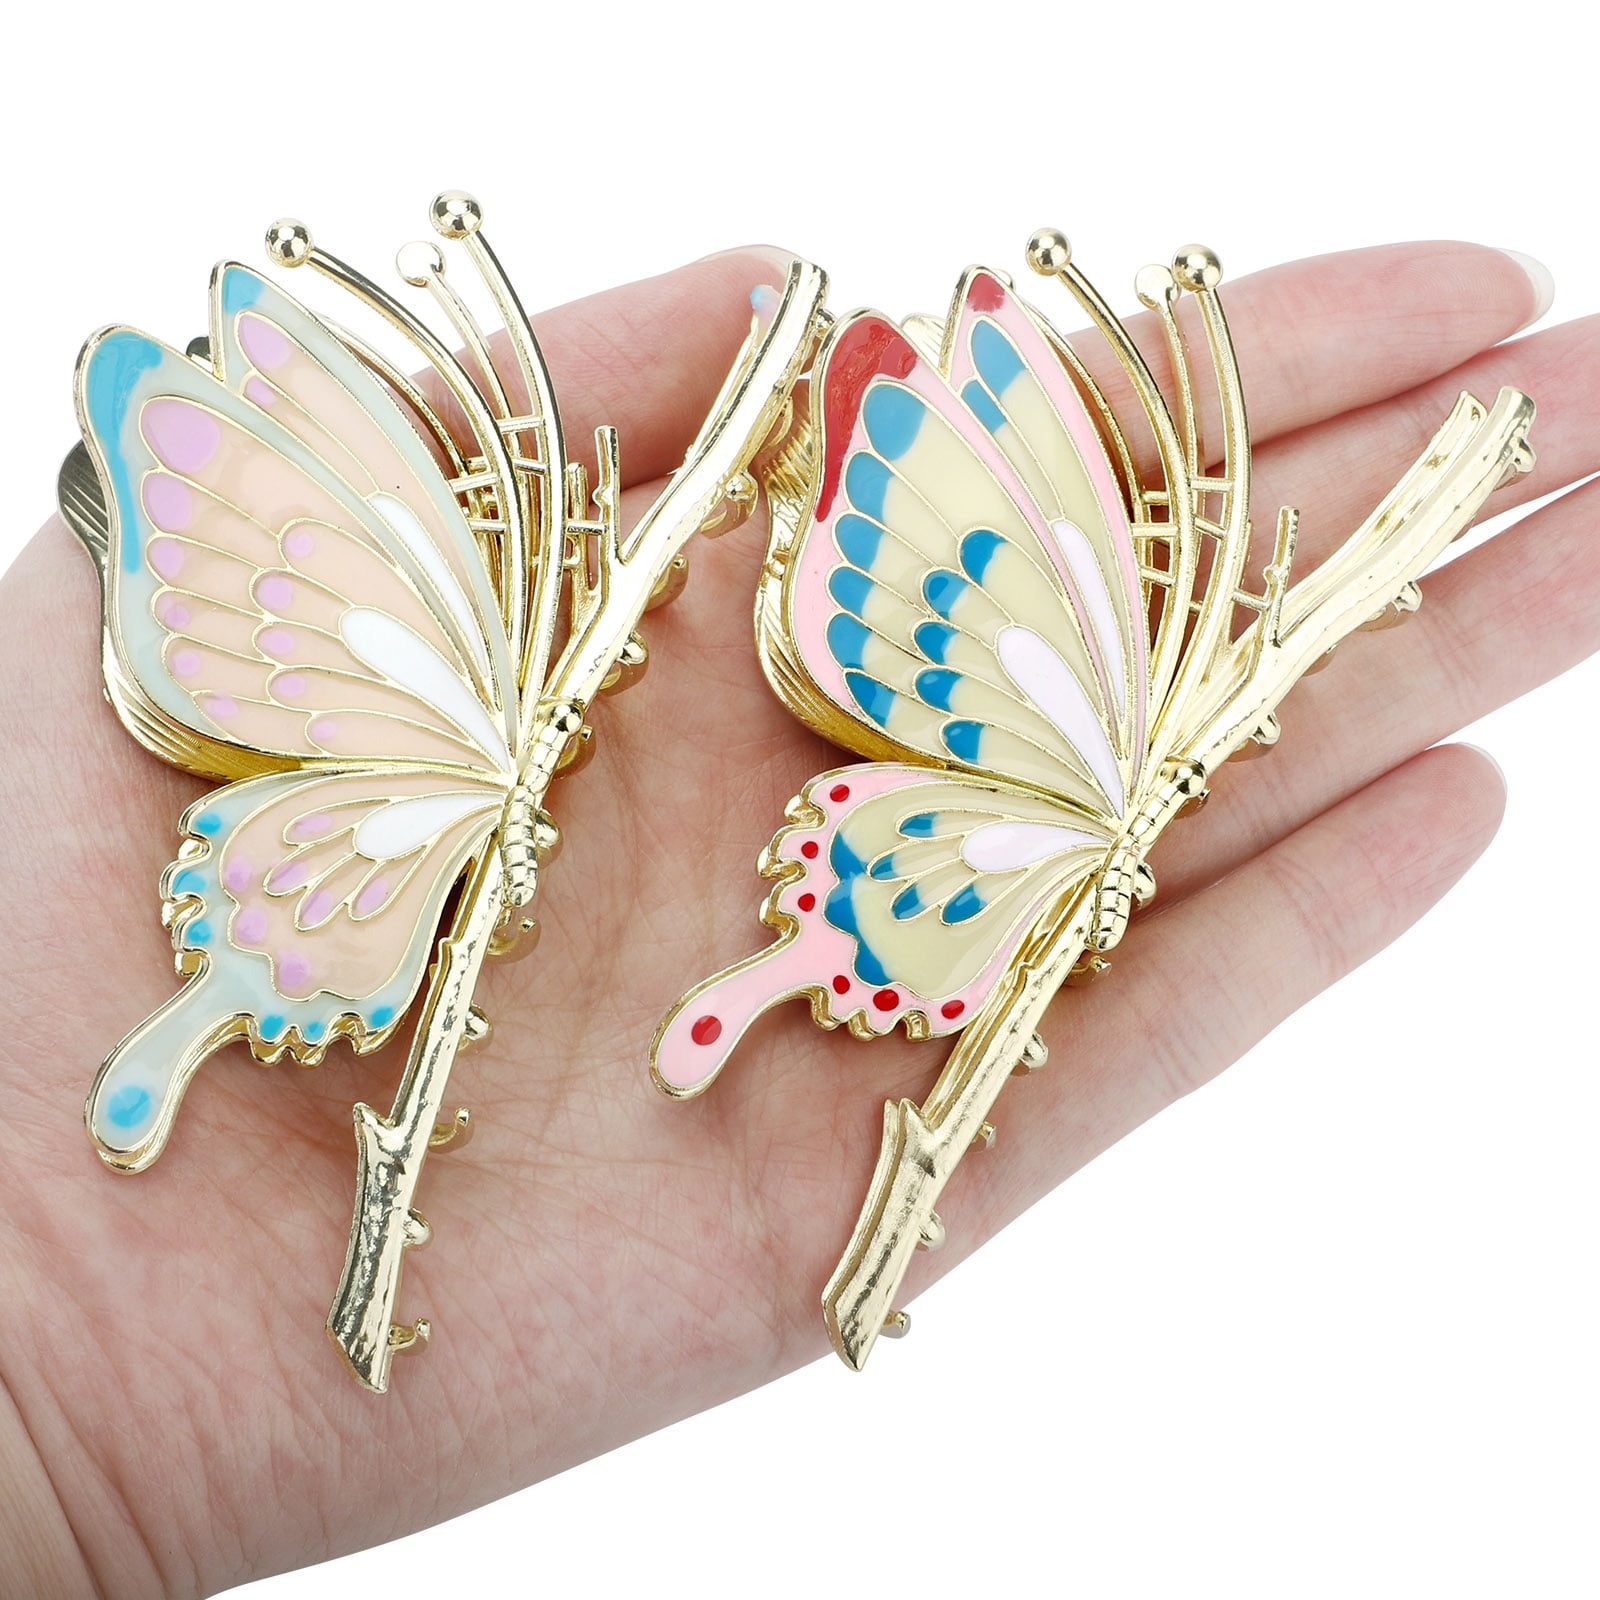  2Pcs Butterfly Hair Claw Clips for Women Big Non-Slip Strong  Rainbow 4.7 Acetate Claw Clips Metal Hair Clip for Girls Hair Accessories  for Long Thick Hair Cute Hair Clips Headwear Gifts 